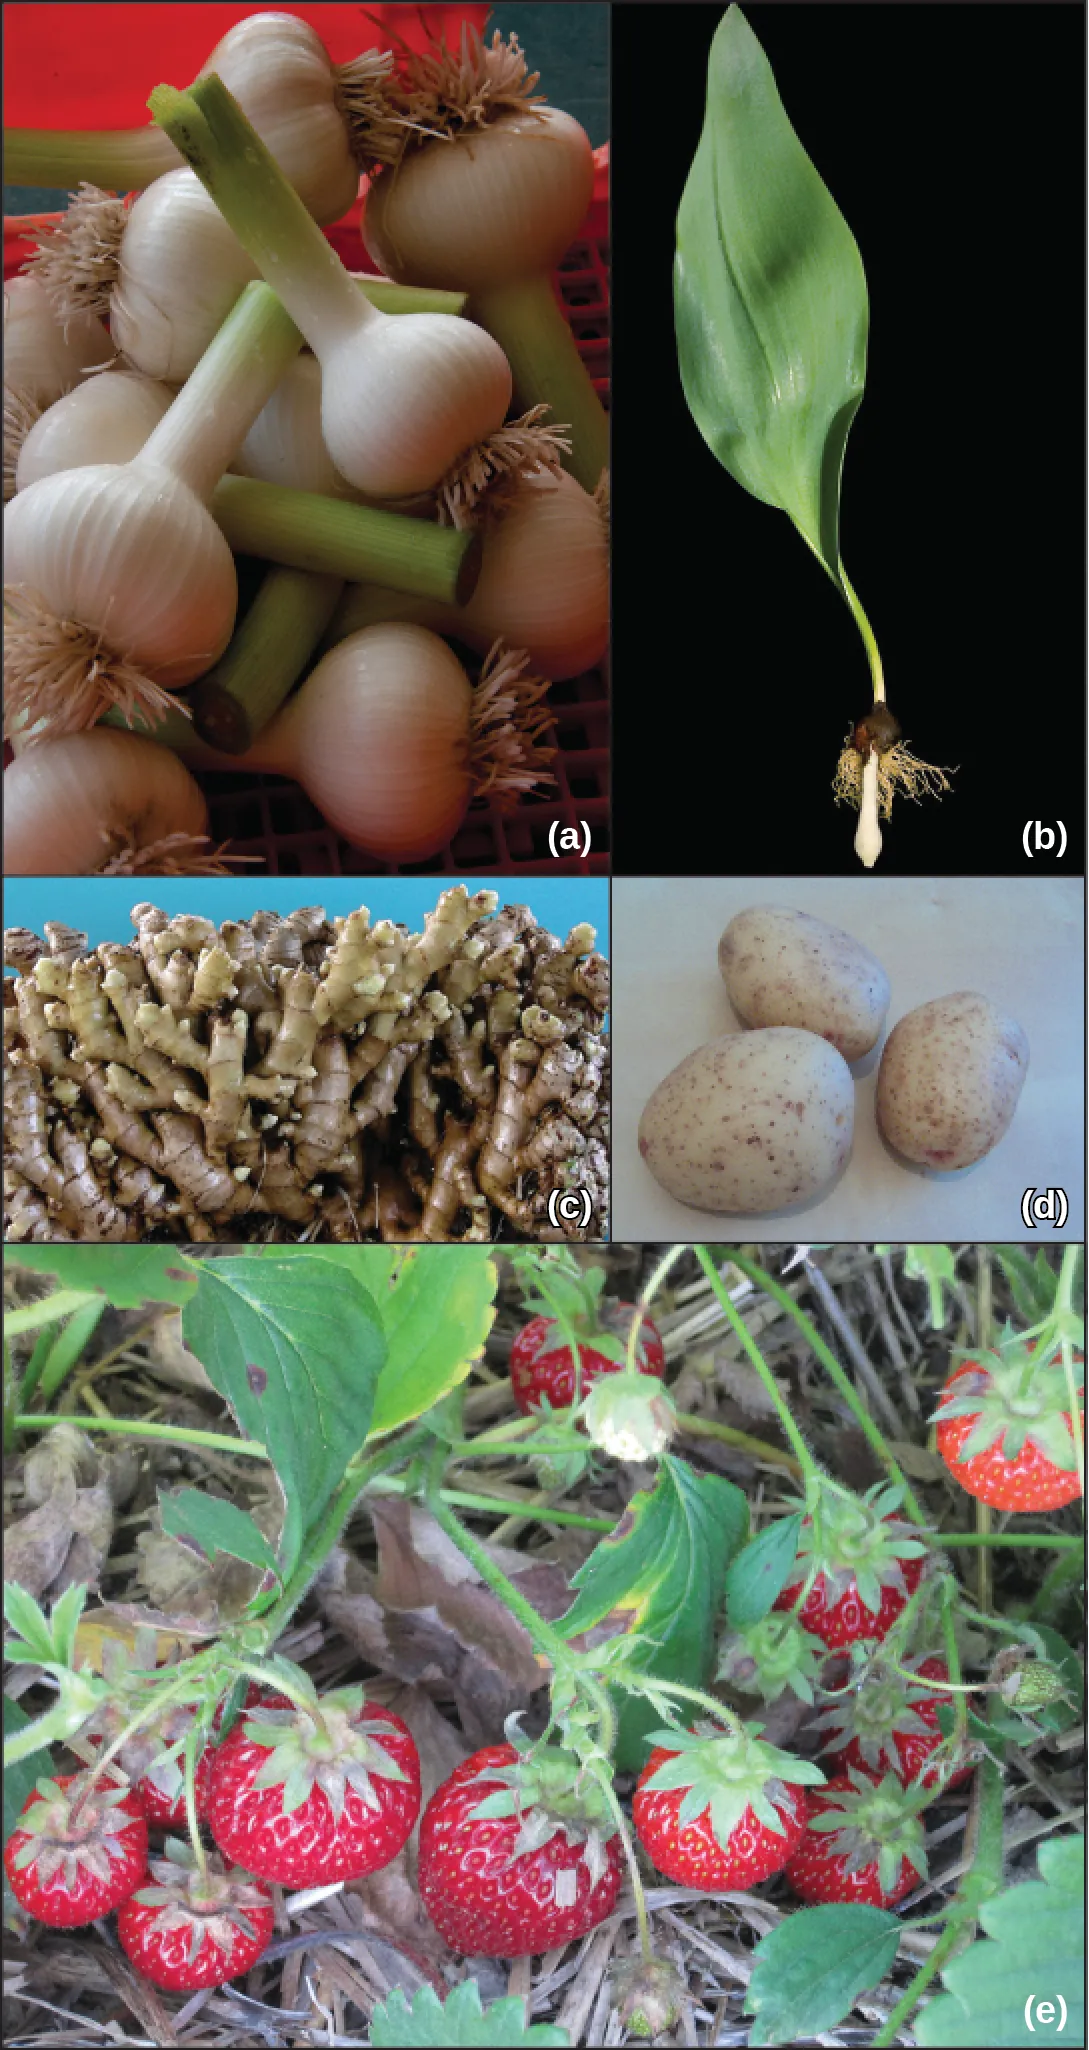 Photo A shows a garlic bulb, with a long tube extending upward.  Photo b shows a plant with a large green leaf whose stem turns into a root system.  Photo C shows a large bundle of ginger stems that are tubular shaped.  Photo D shows potatoes, which are somewhat oval shaped.  Photo E shows strawberries growing along the ground.